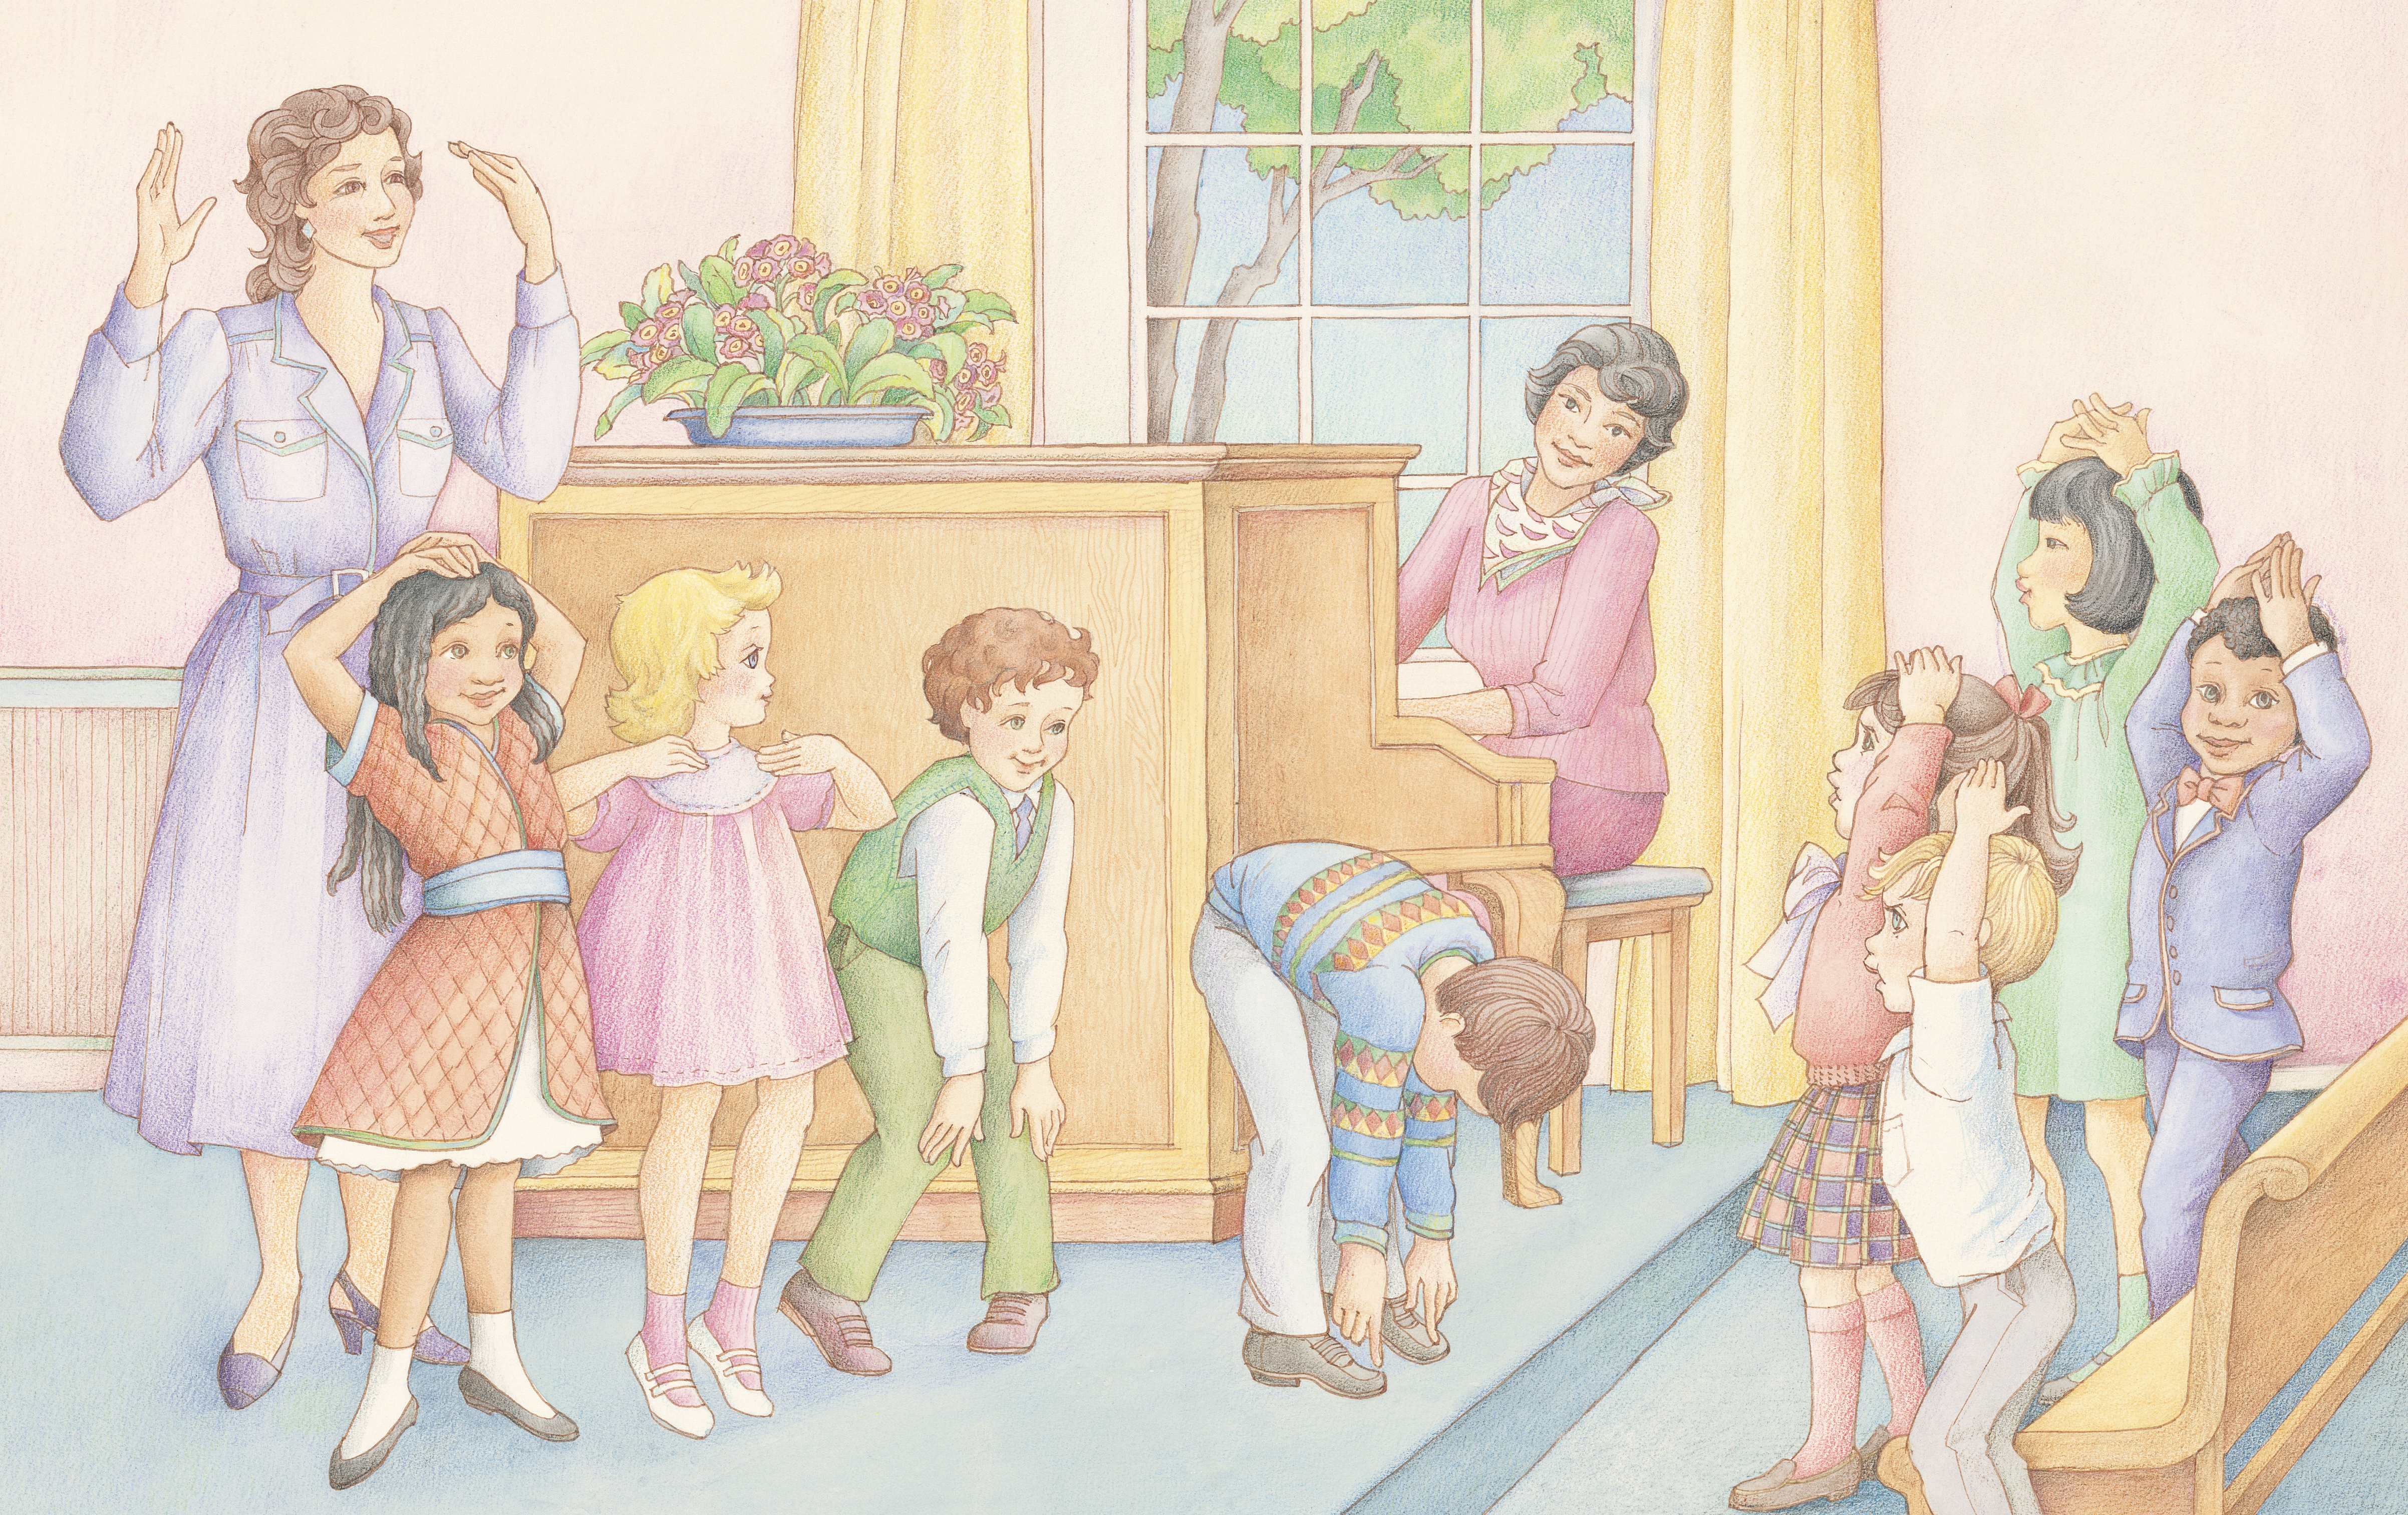 A group of Primary children singing a song and doing the motions together. From the section “Fun and Activity” in the Children’s Songbook, pages 250–251; watercolor illustration by Phyllis Luch.